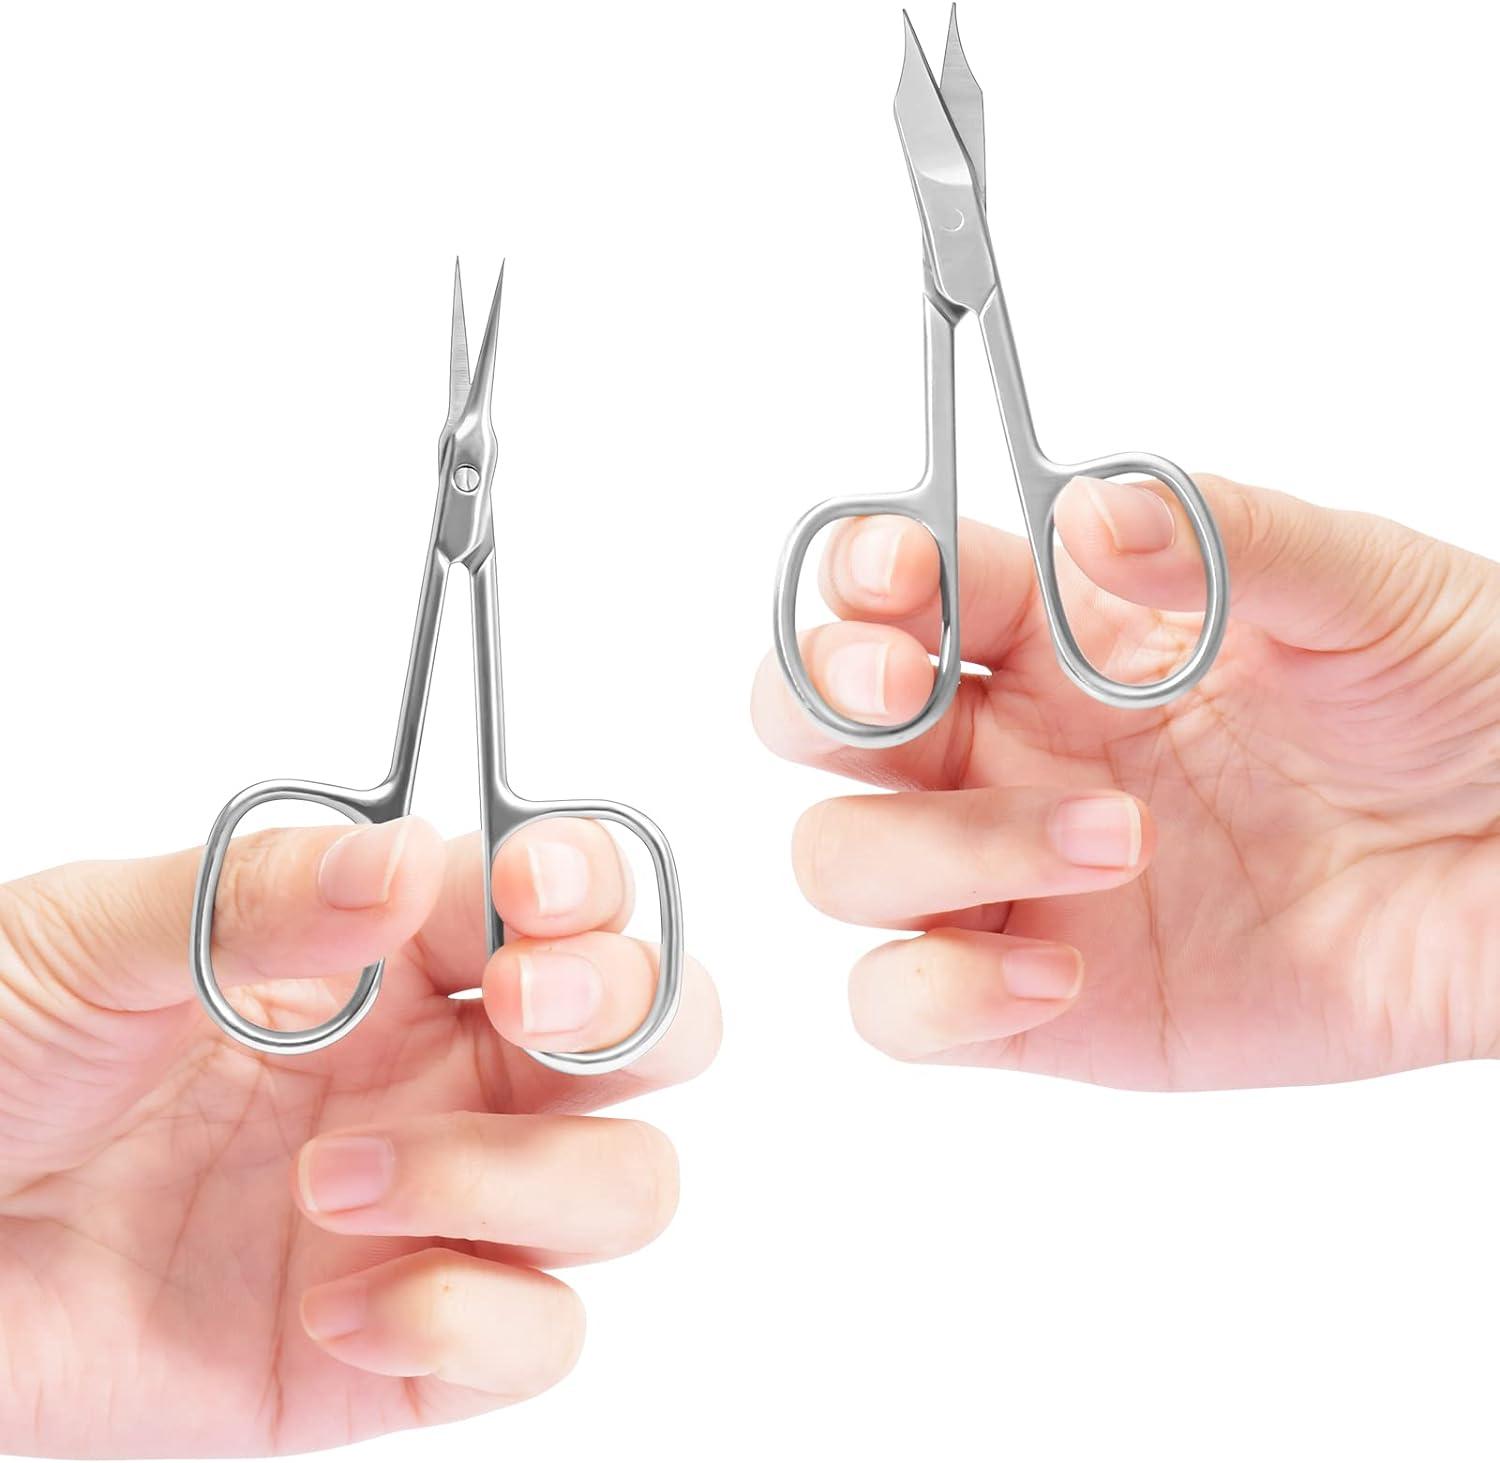 Nail scissors – curved